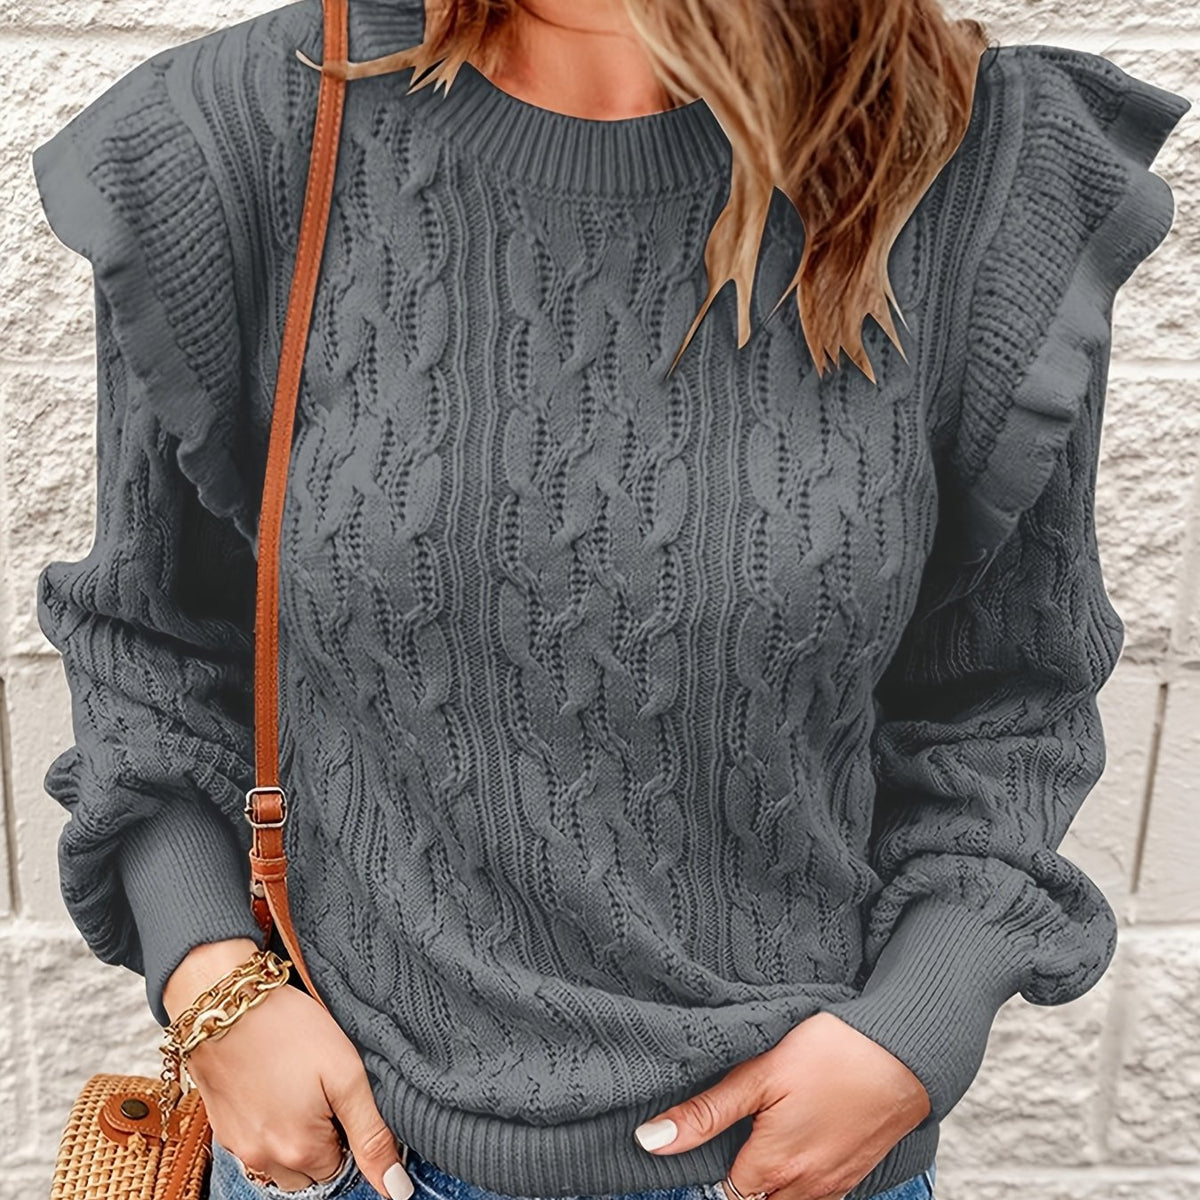 Ruffle Trim Knit Sweater, Casual Solid Long Sleeve Crew Neck Sweater, Women's Clothing